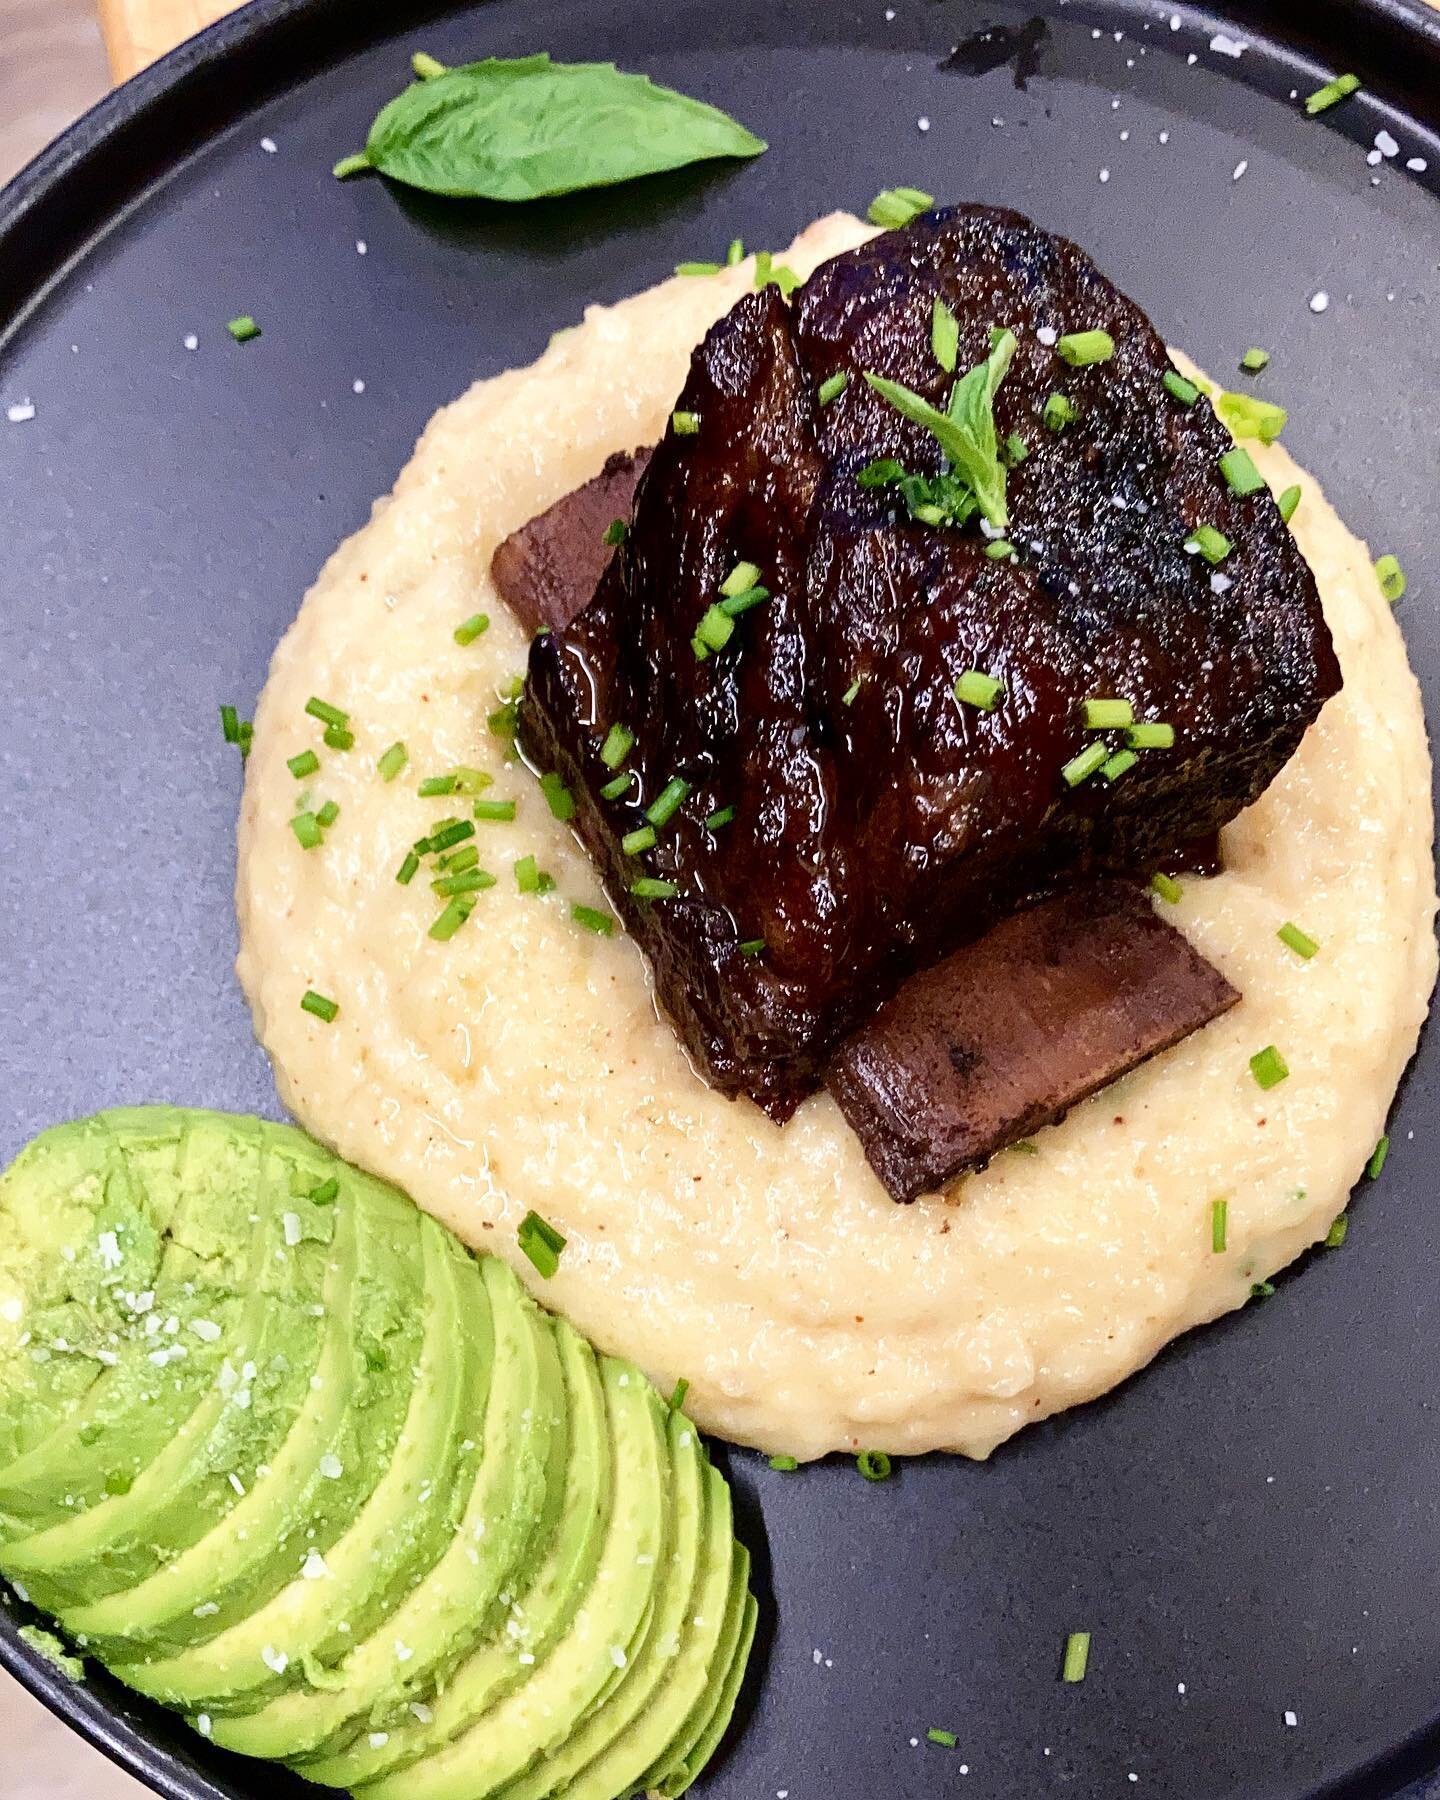 These short ribs and mash will take you to the next level of humanity